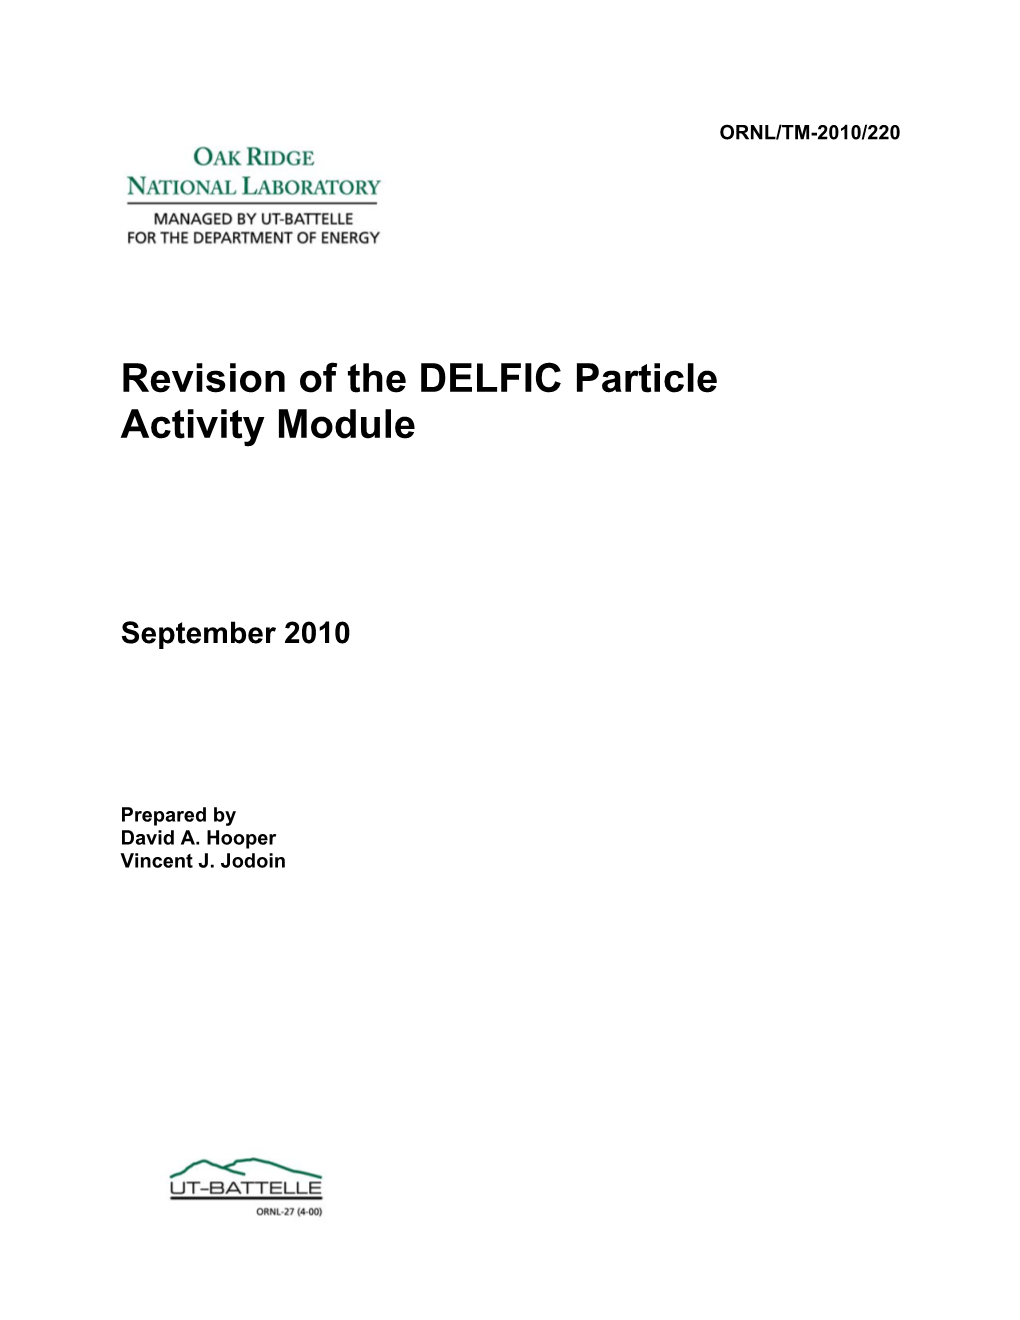 Revision of the DELFIC Particle Activity Module